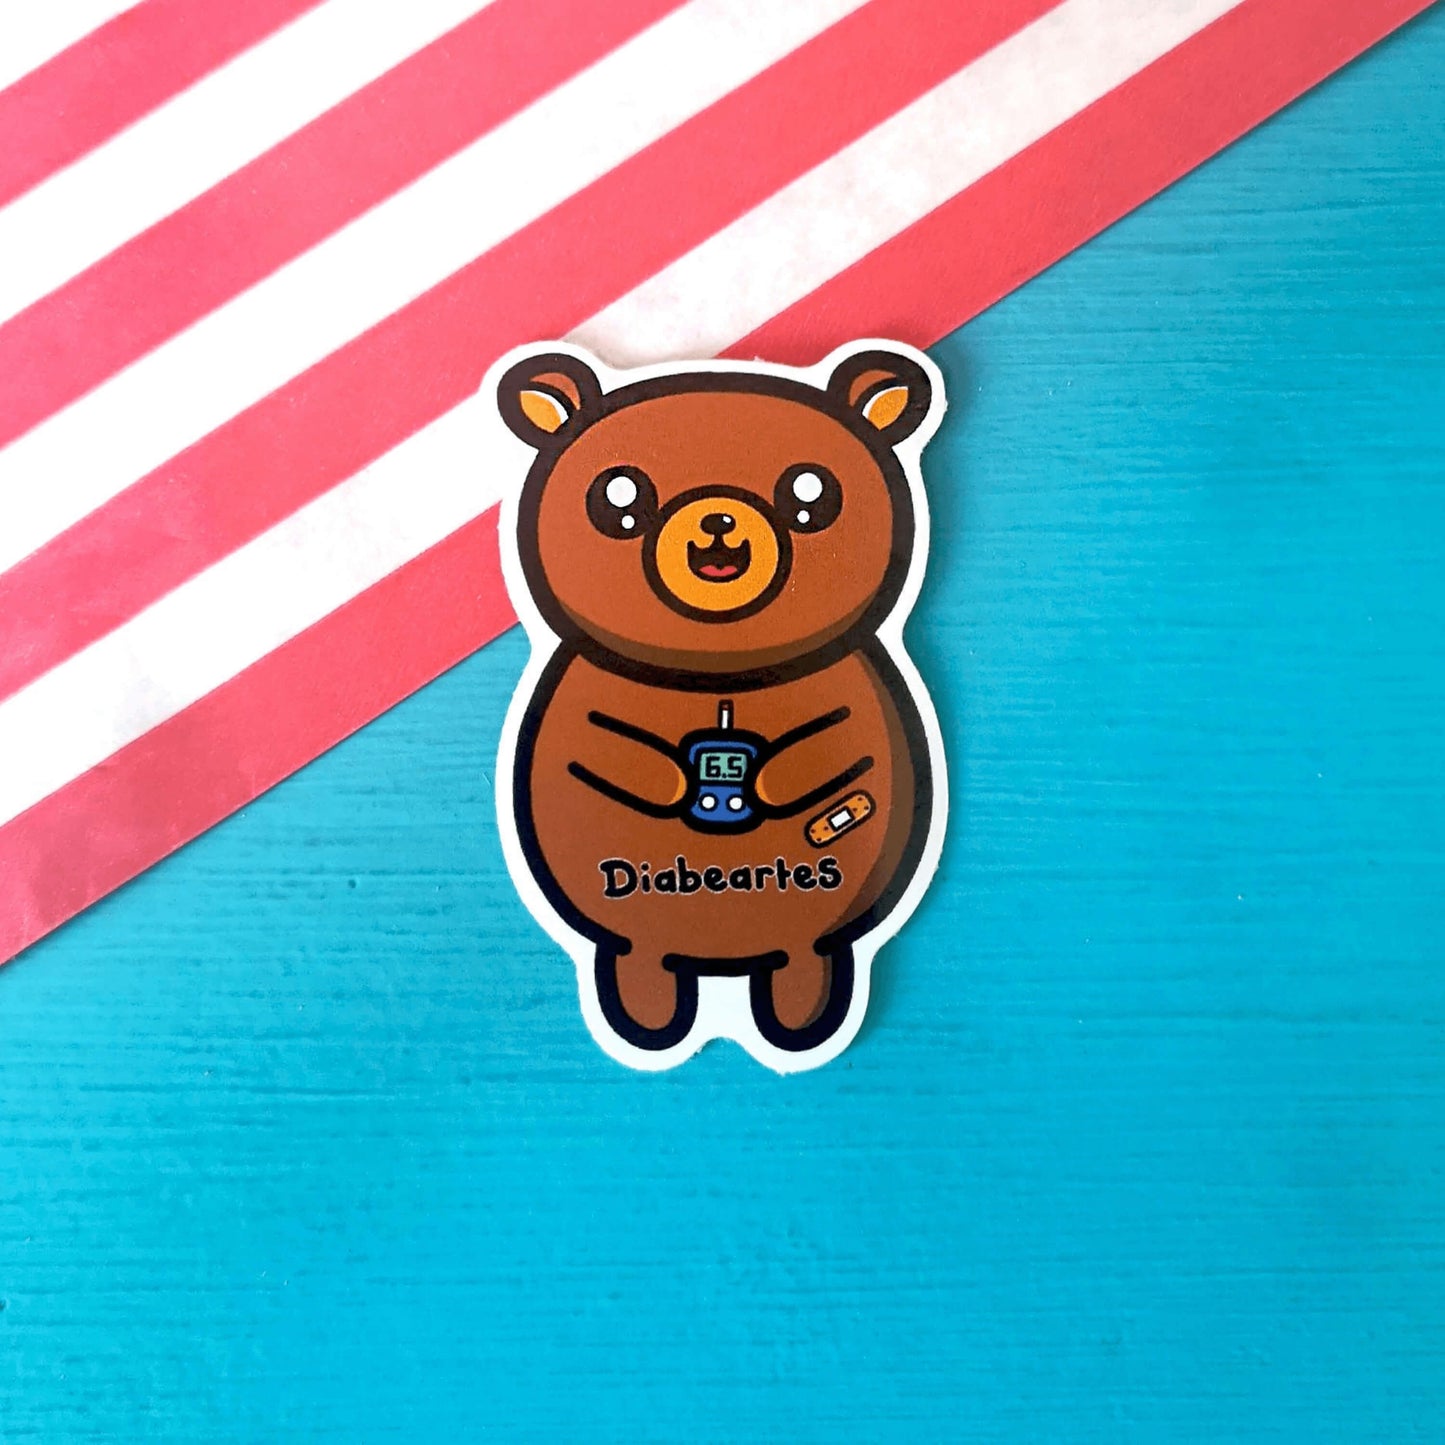 The Diabeartes Sticker - Diabetes on a red stripe candy bag and blue background. The brown bear shaped sticker is smiling holding a blood glucose reader with a plaster on its arm, across its tummy reads 'diabeartes' in black. The design is raising awareness for those with type 1 diabetes and type 2 diabetes.